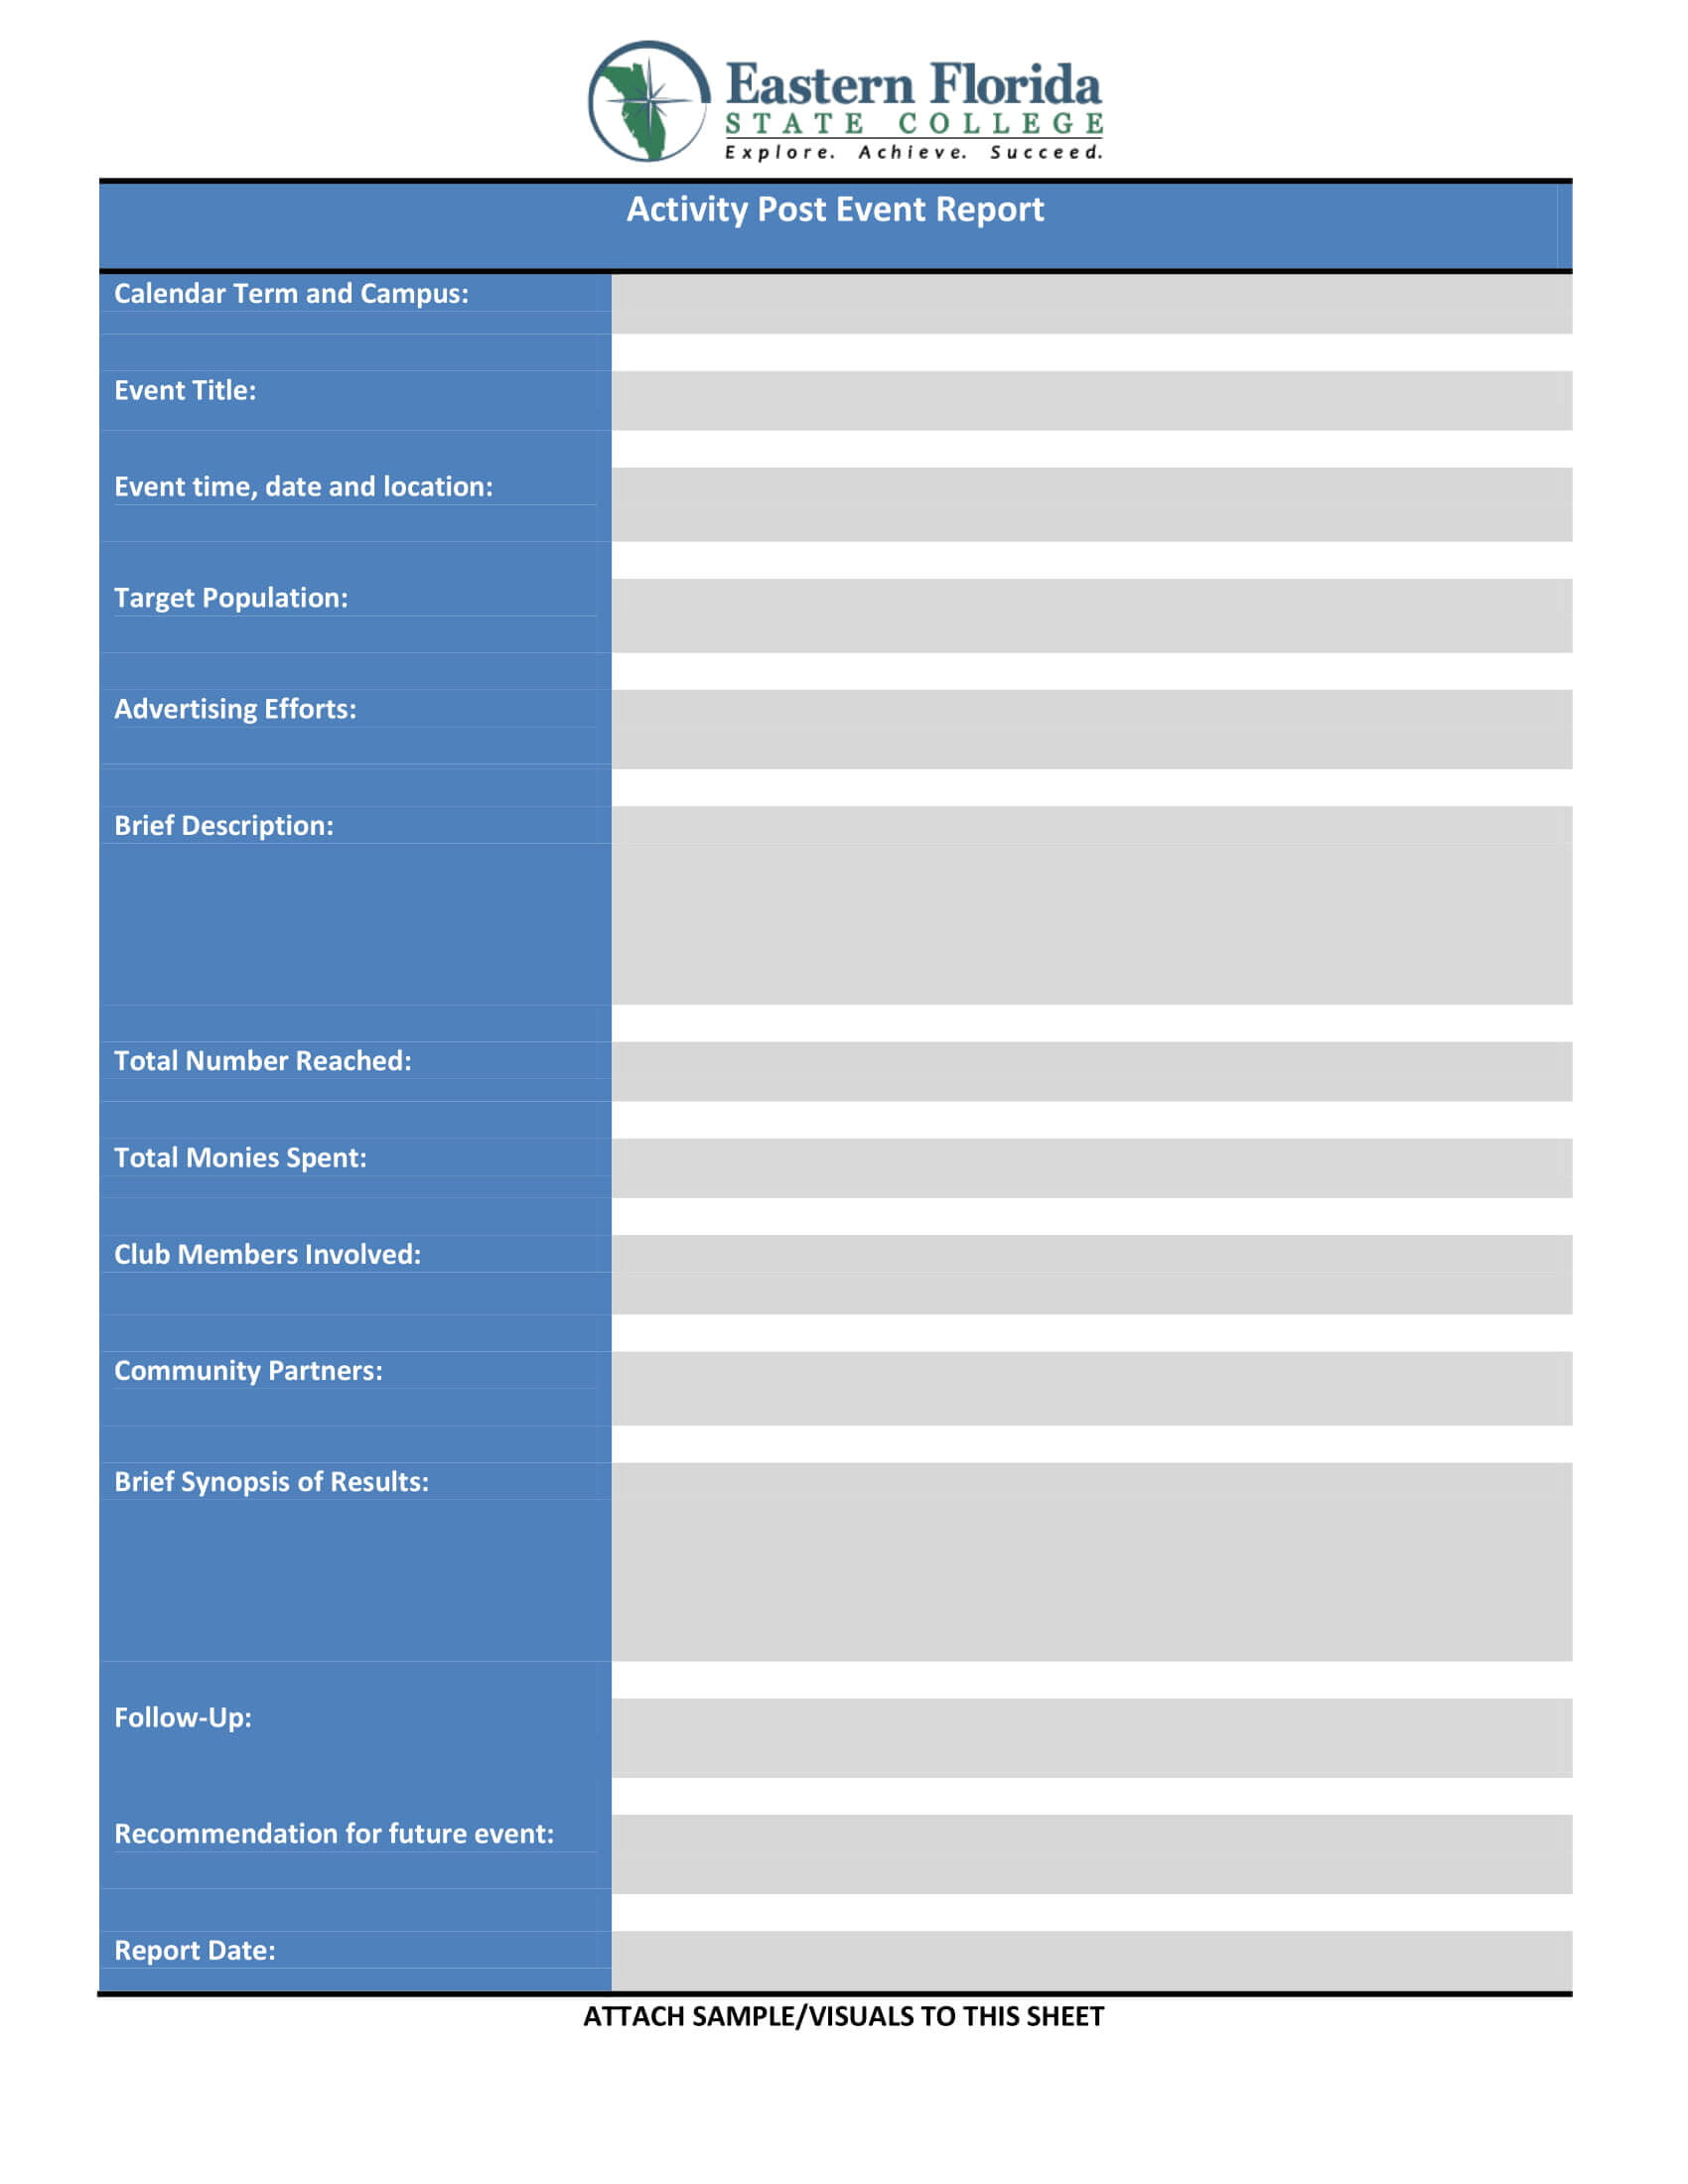 9+ Event Report – Pdf, Docs, Word, Pages | Examples Inside Post Event Evaluation Report Template